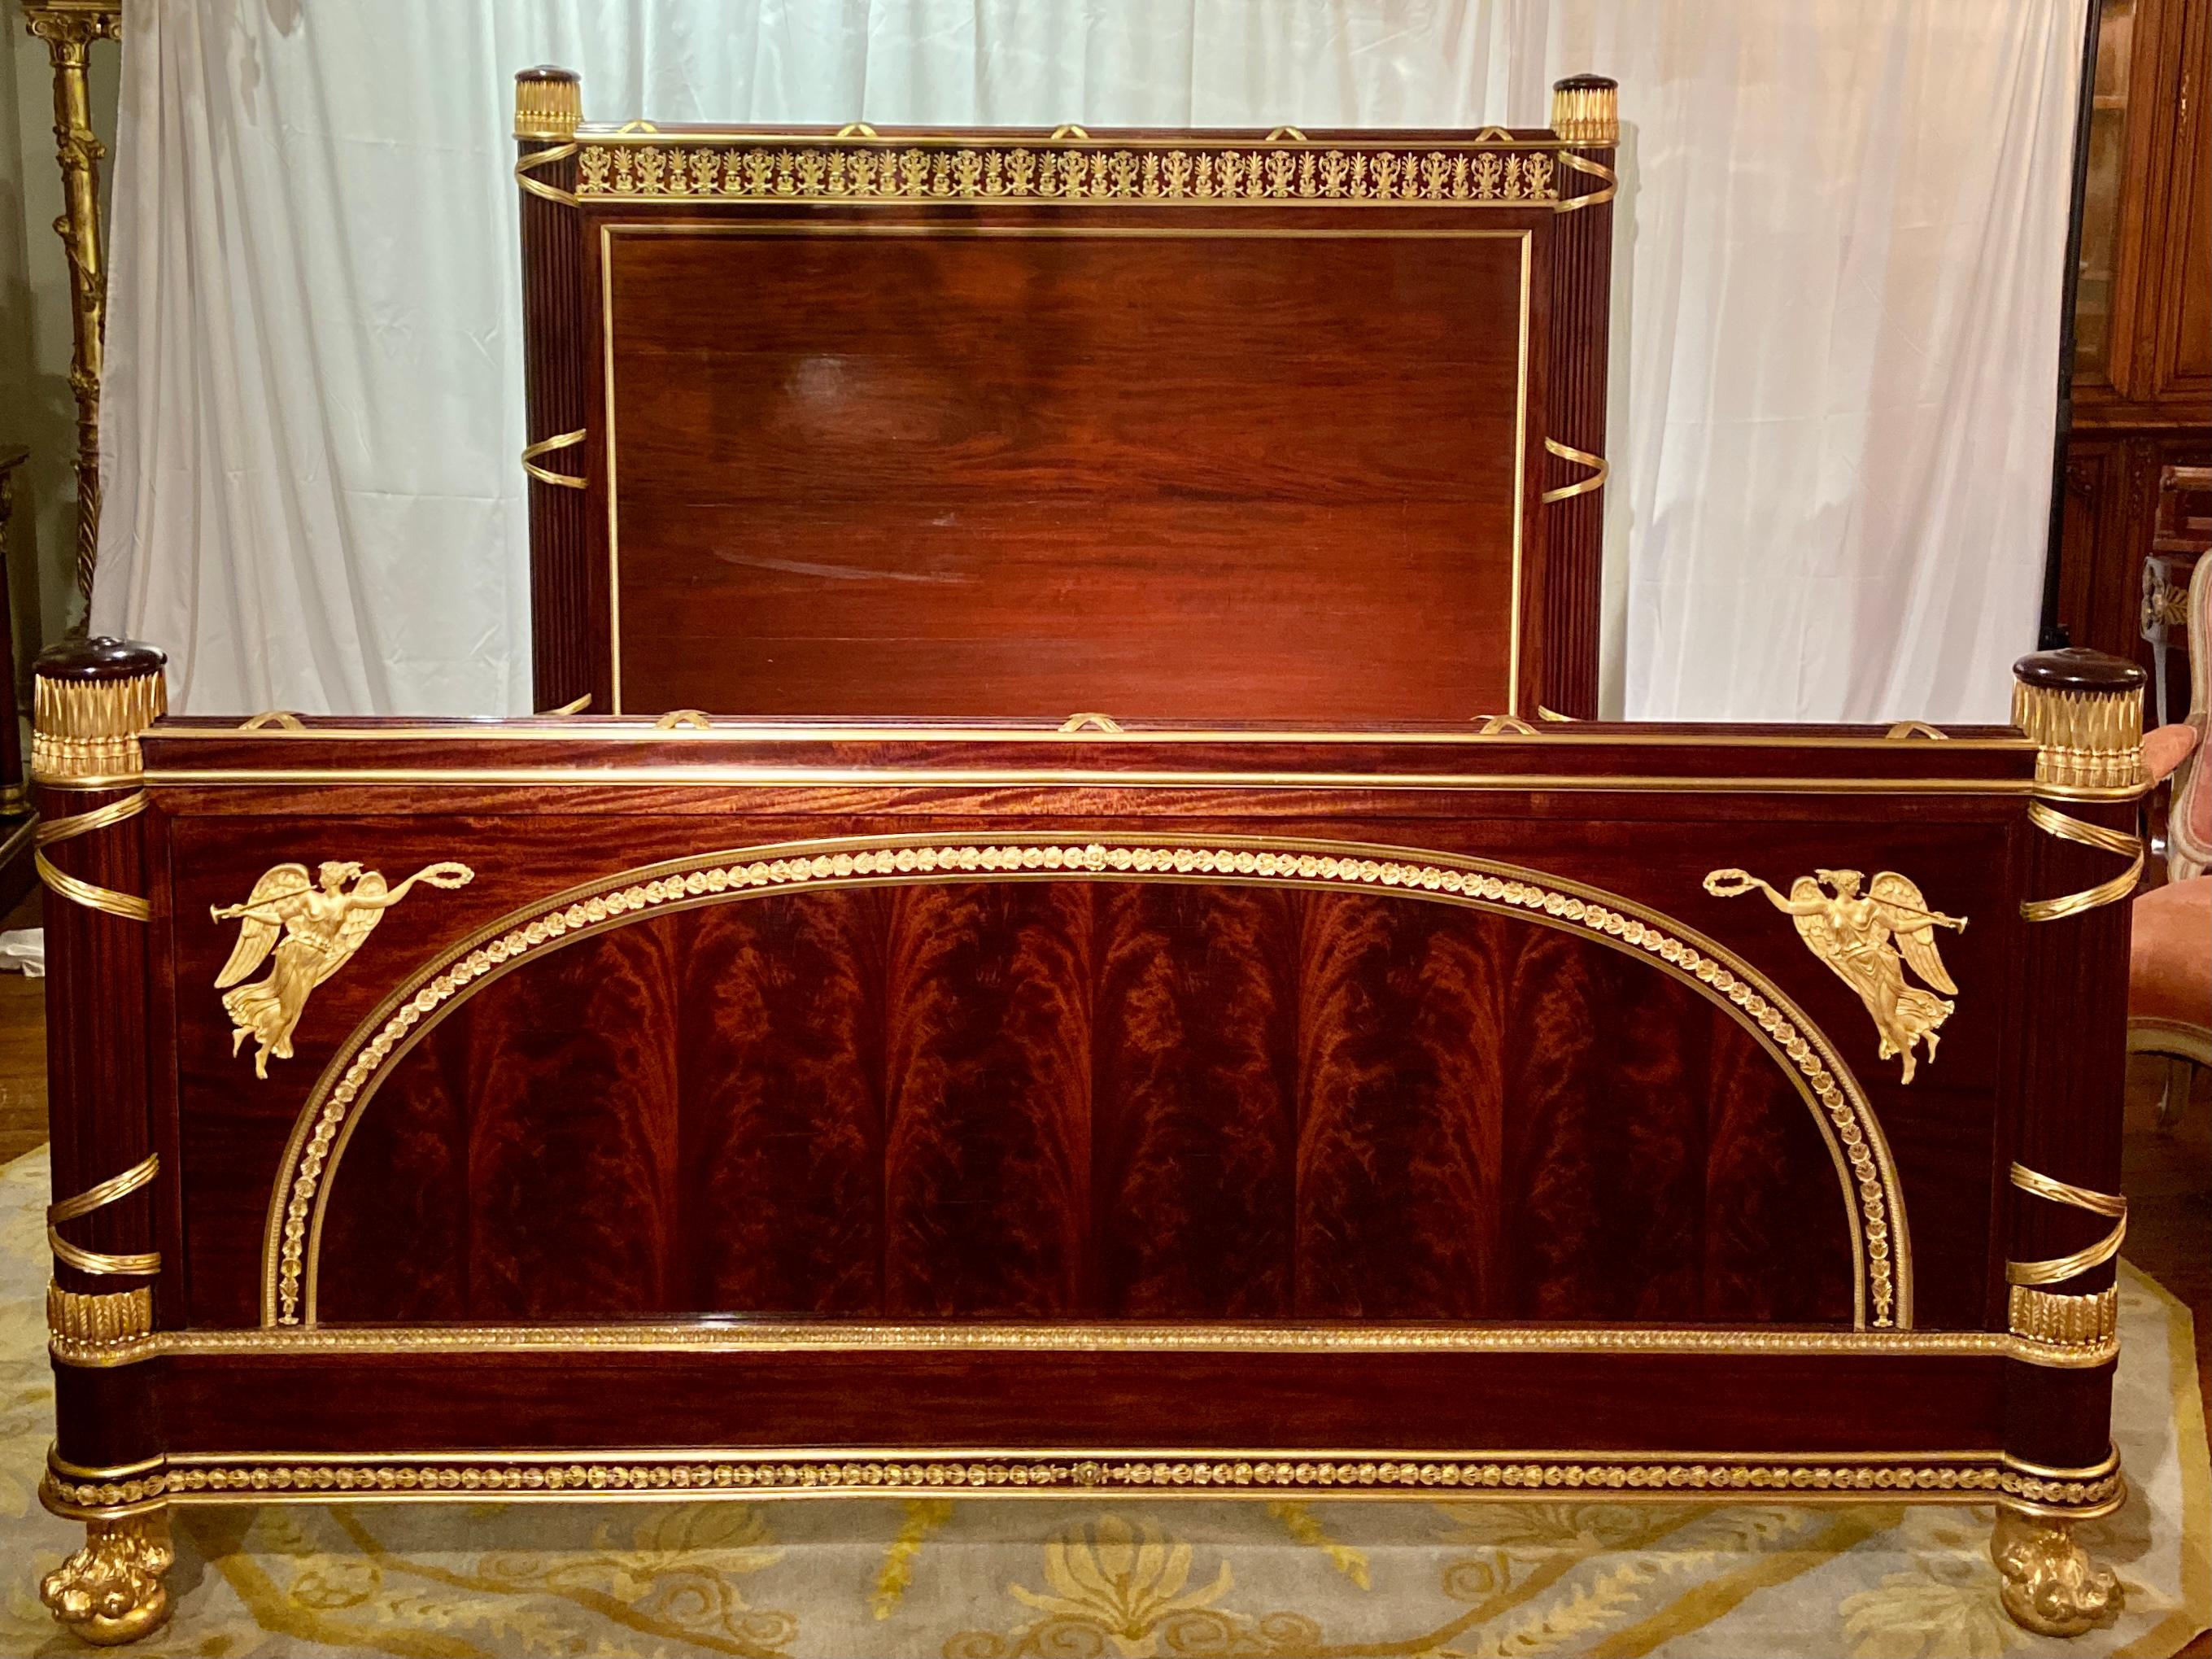 Antique French museum quality mahogany and ormolu king-size bed by Master Ebeniste, France, Circa 1880-1890's. One of the finest originals offered for private sale.
Measurements: 
Headboard: 64 inches High x 78 inches Wide
Footboard: 38-1/2